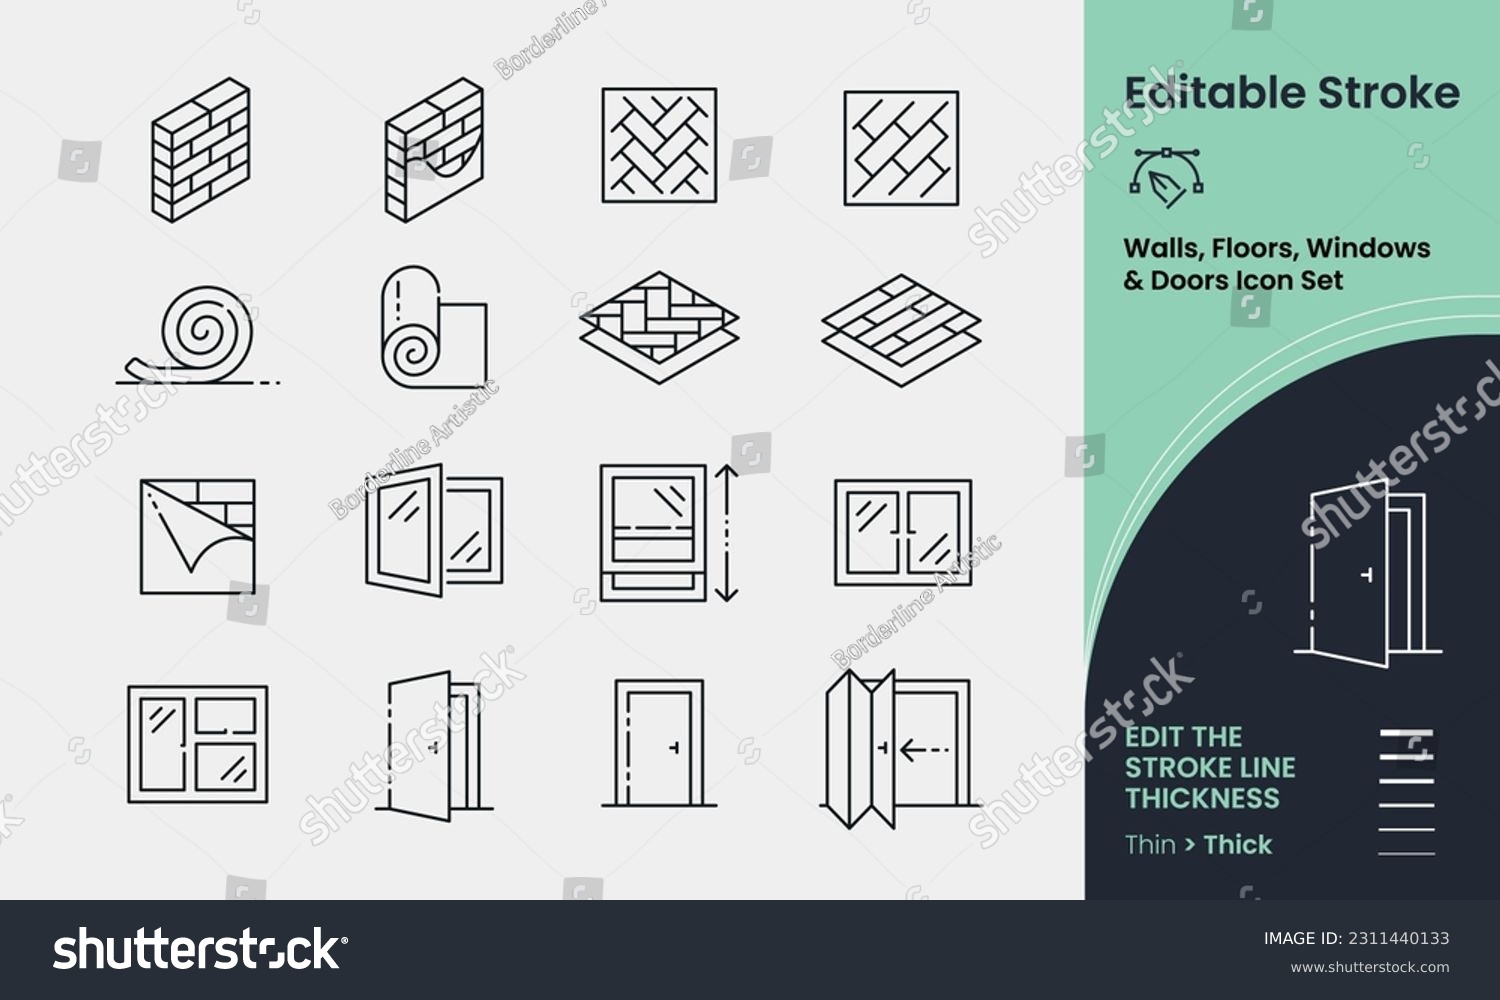 SVG of Walls, Floor, Windows and Doors Icon collection containing 16 editable stroke icons. Perfect for logos, stats and infographics. Edit the thickness of the line in any vector capable app. svg